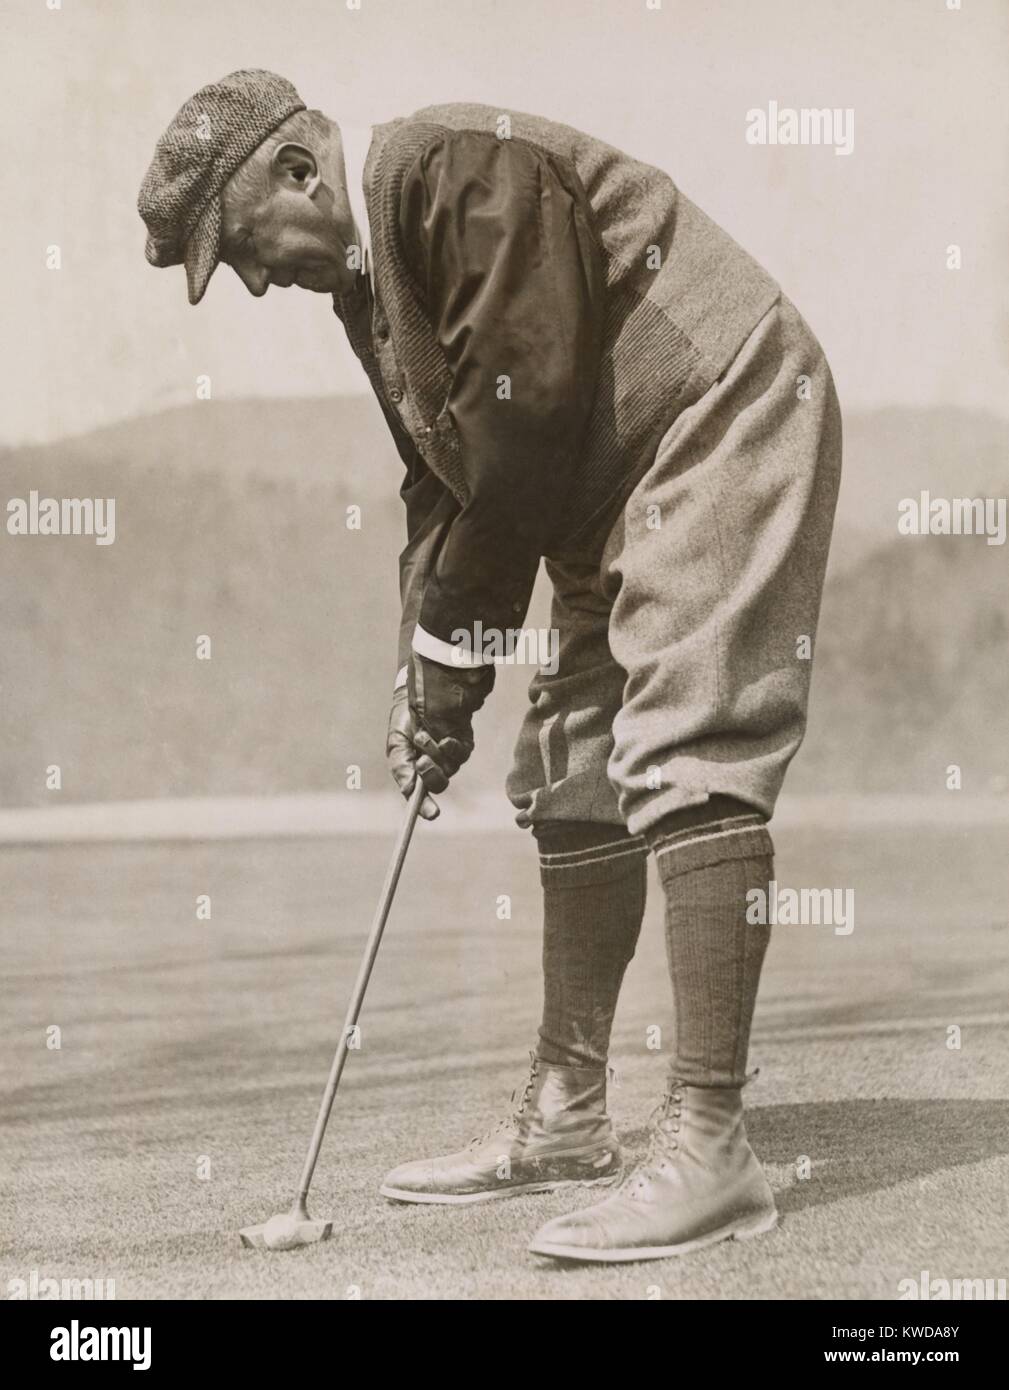 Charles M. Schwab golfing at White Sulphur Springs, West Virginia, 1922. He made his fortune as head of Bethlehem Shipbuilding and Steel Company from 1903 supplying steel for ship building, skyscrapers, and World War 1 (BSLOC 2016 8 11) Stock Photo